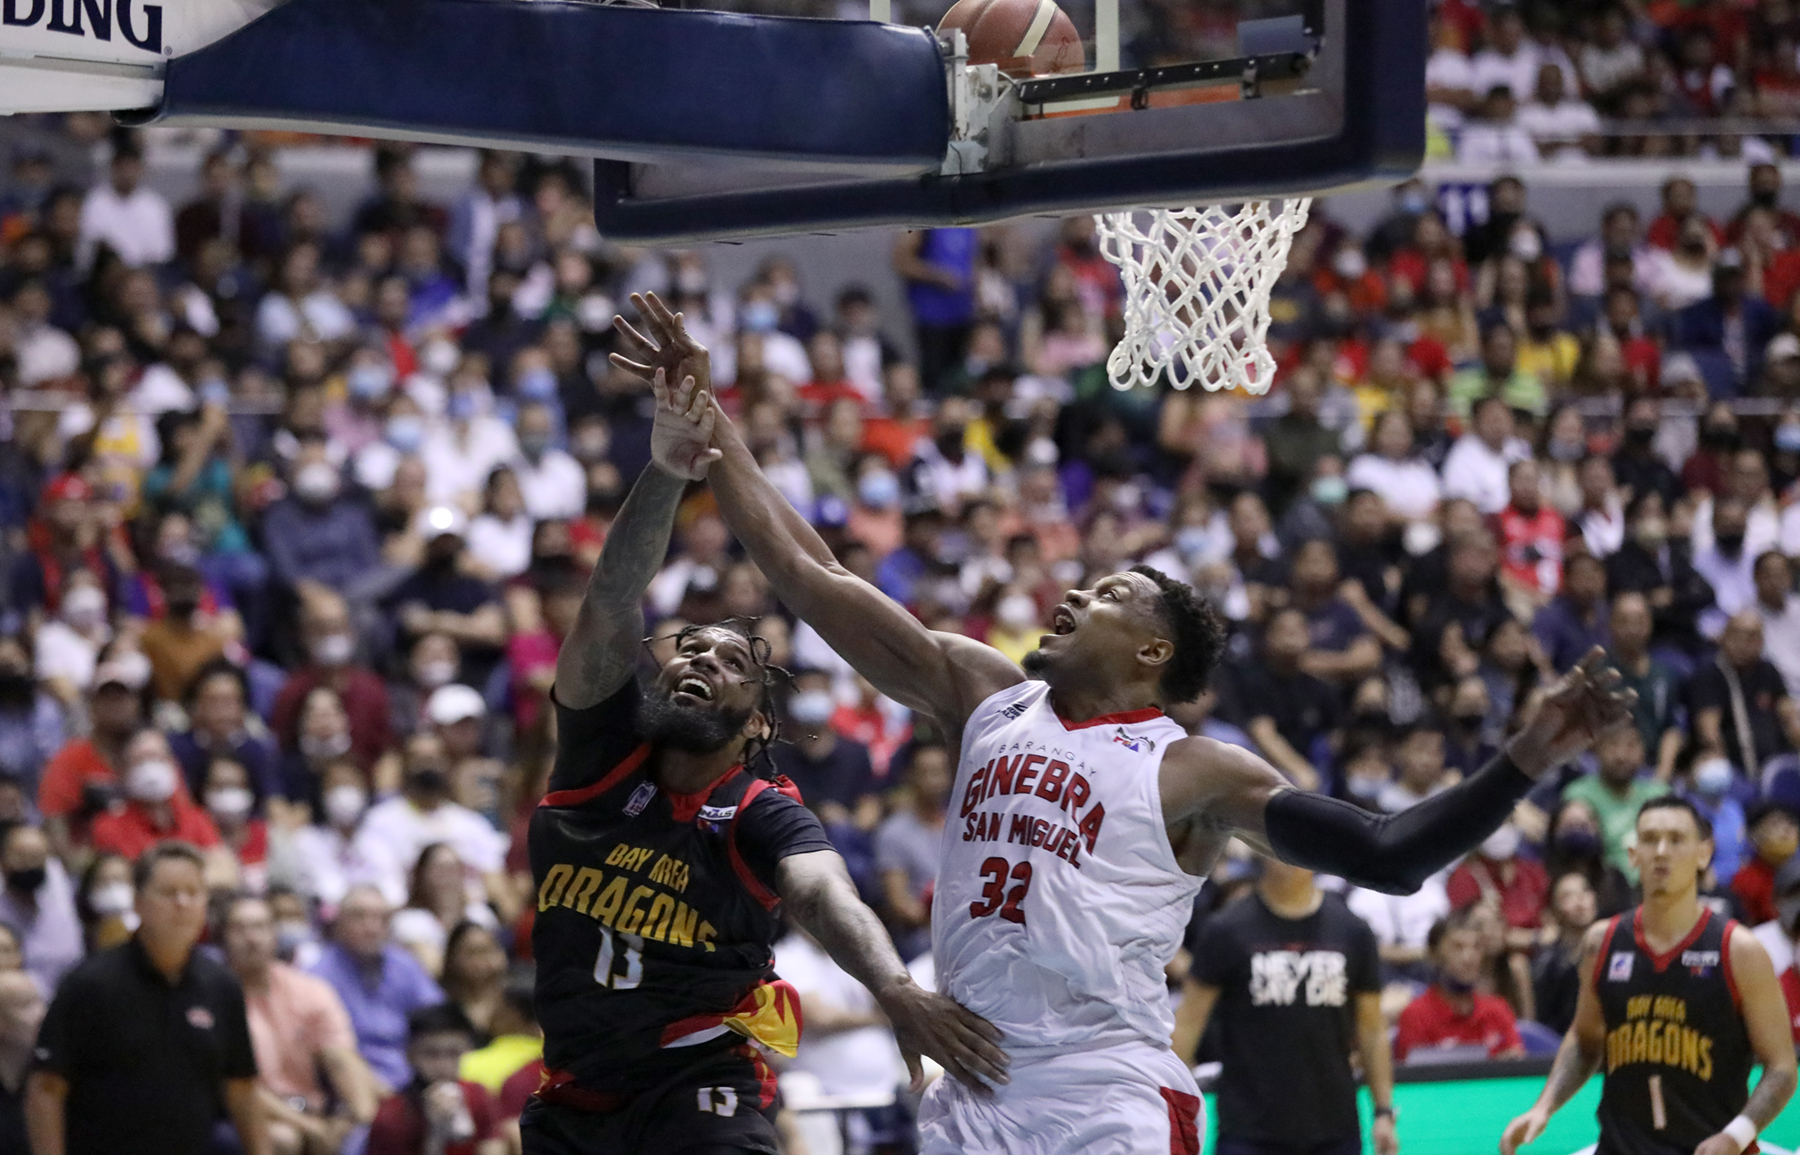 Bay Area Dragons stay alive, force Game 7 vs Ginebra